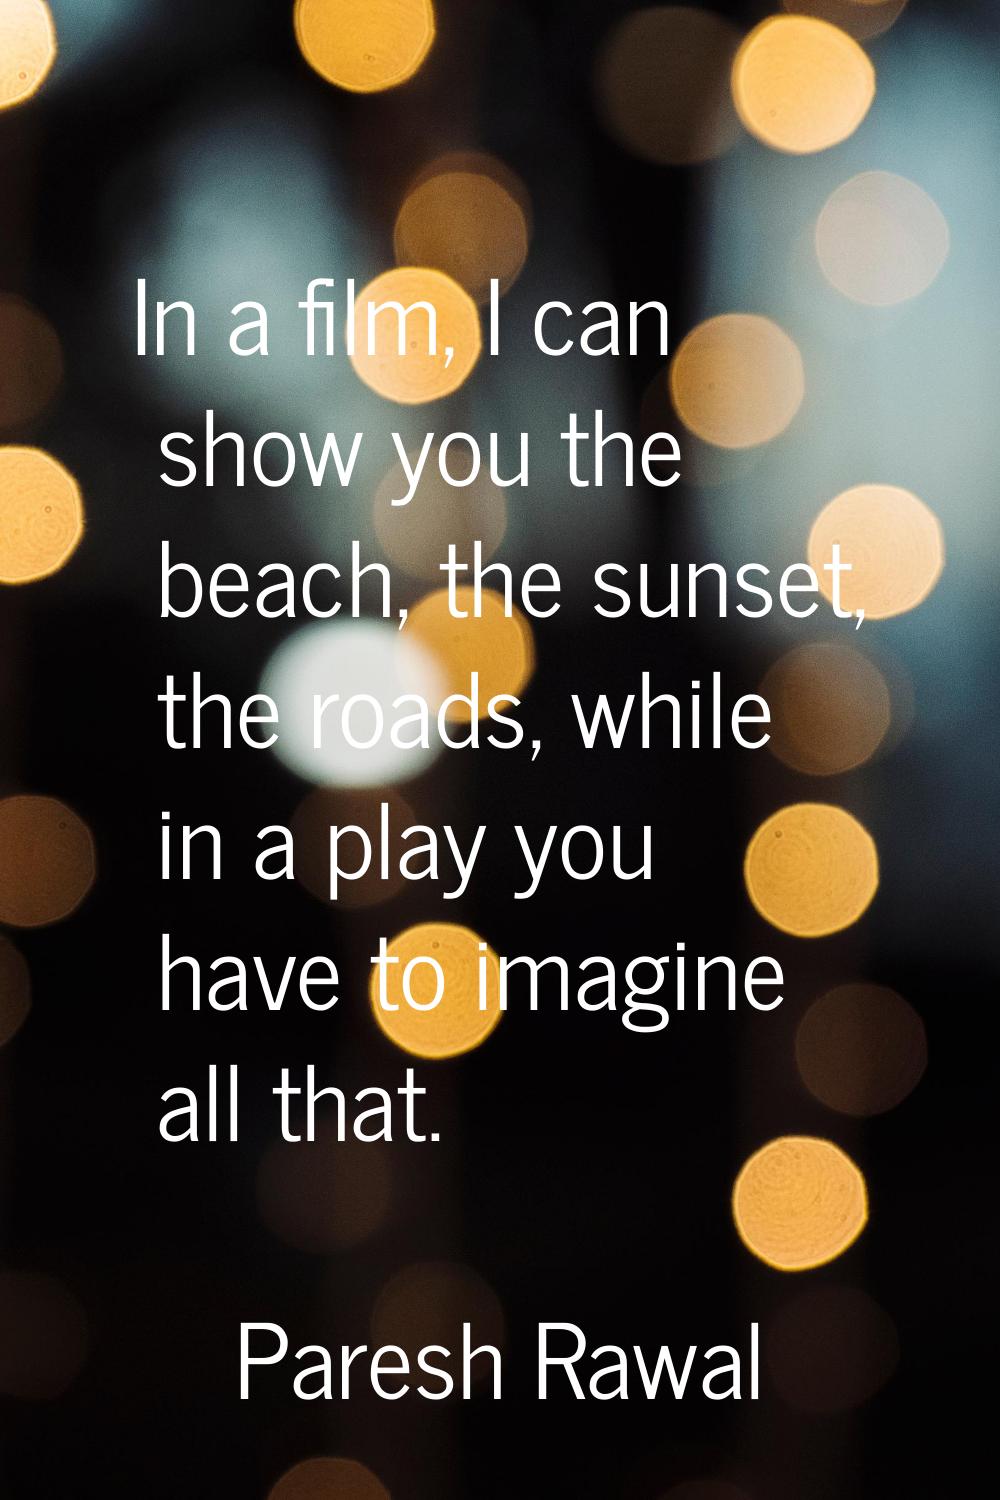 In a film, I can show you the beach, the sunset, the roads, while in a play you have to imagine all